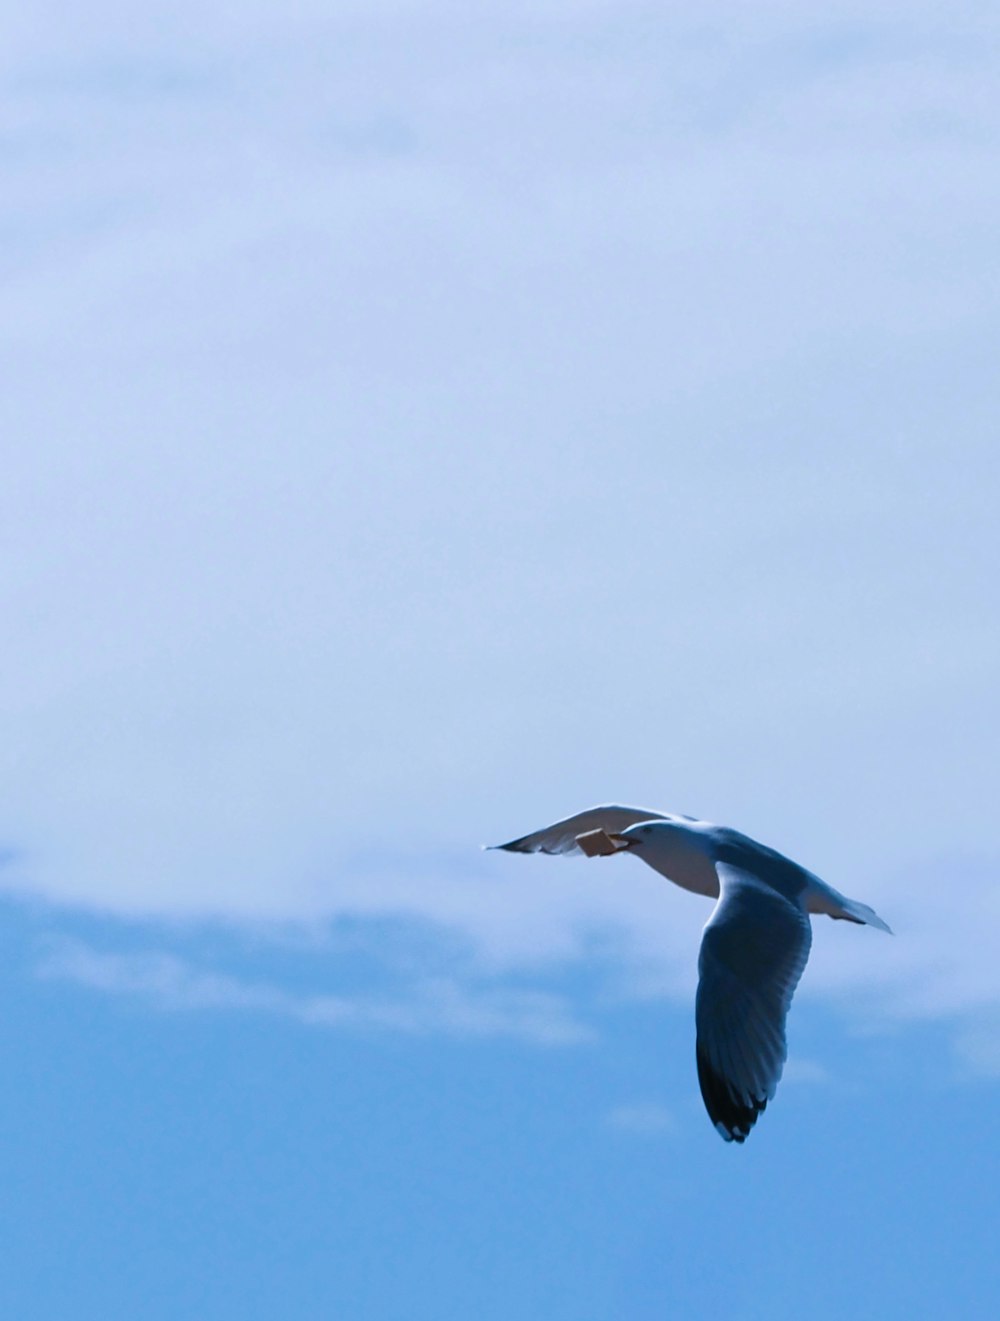 a seagull flying through the air with a blue sky in the background